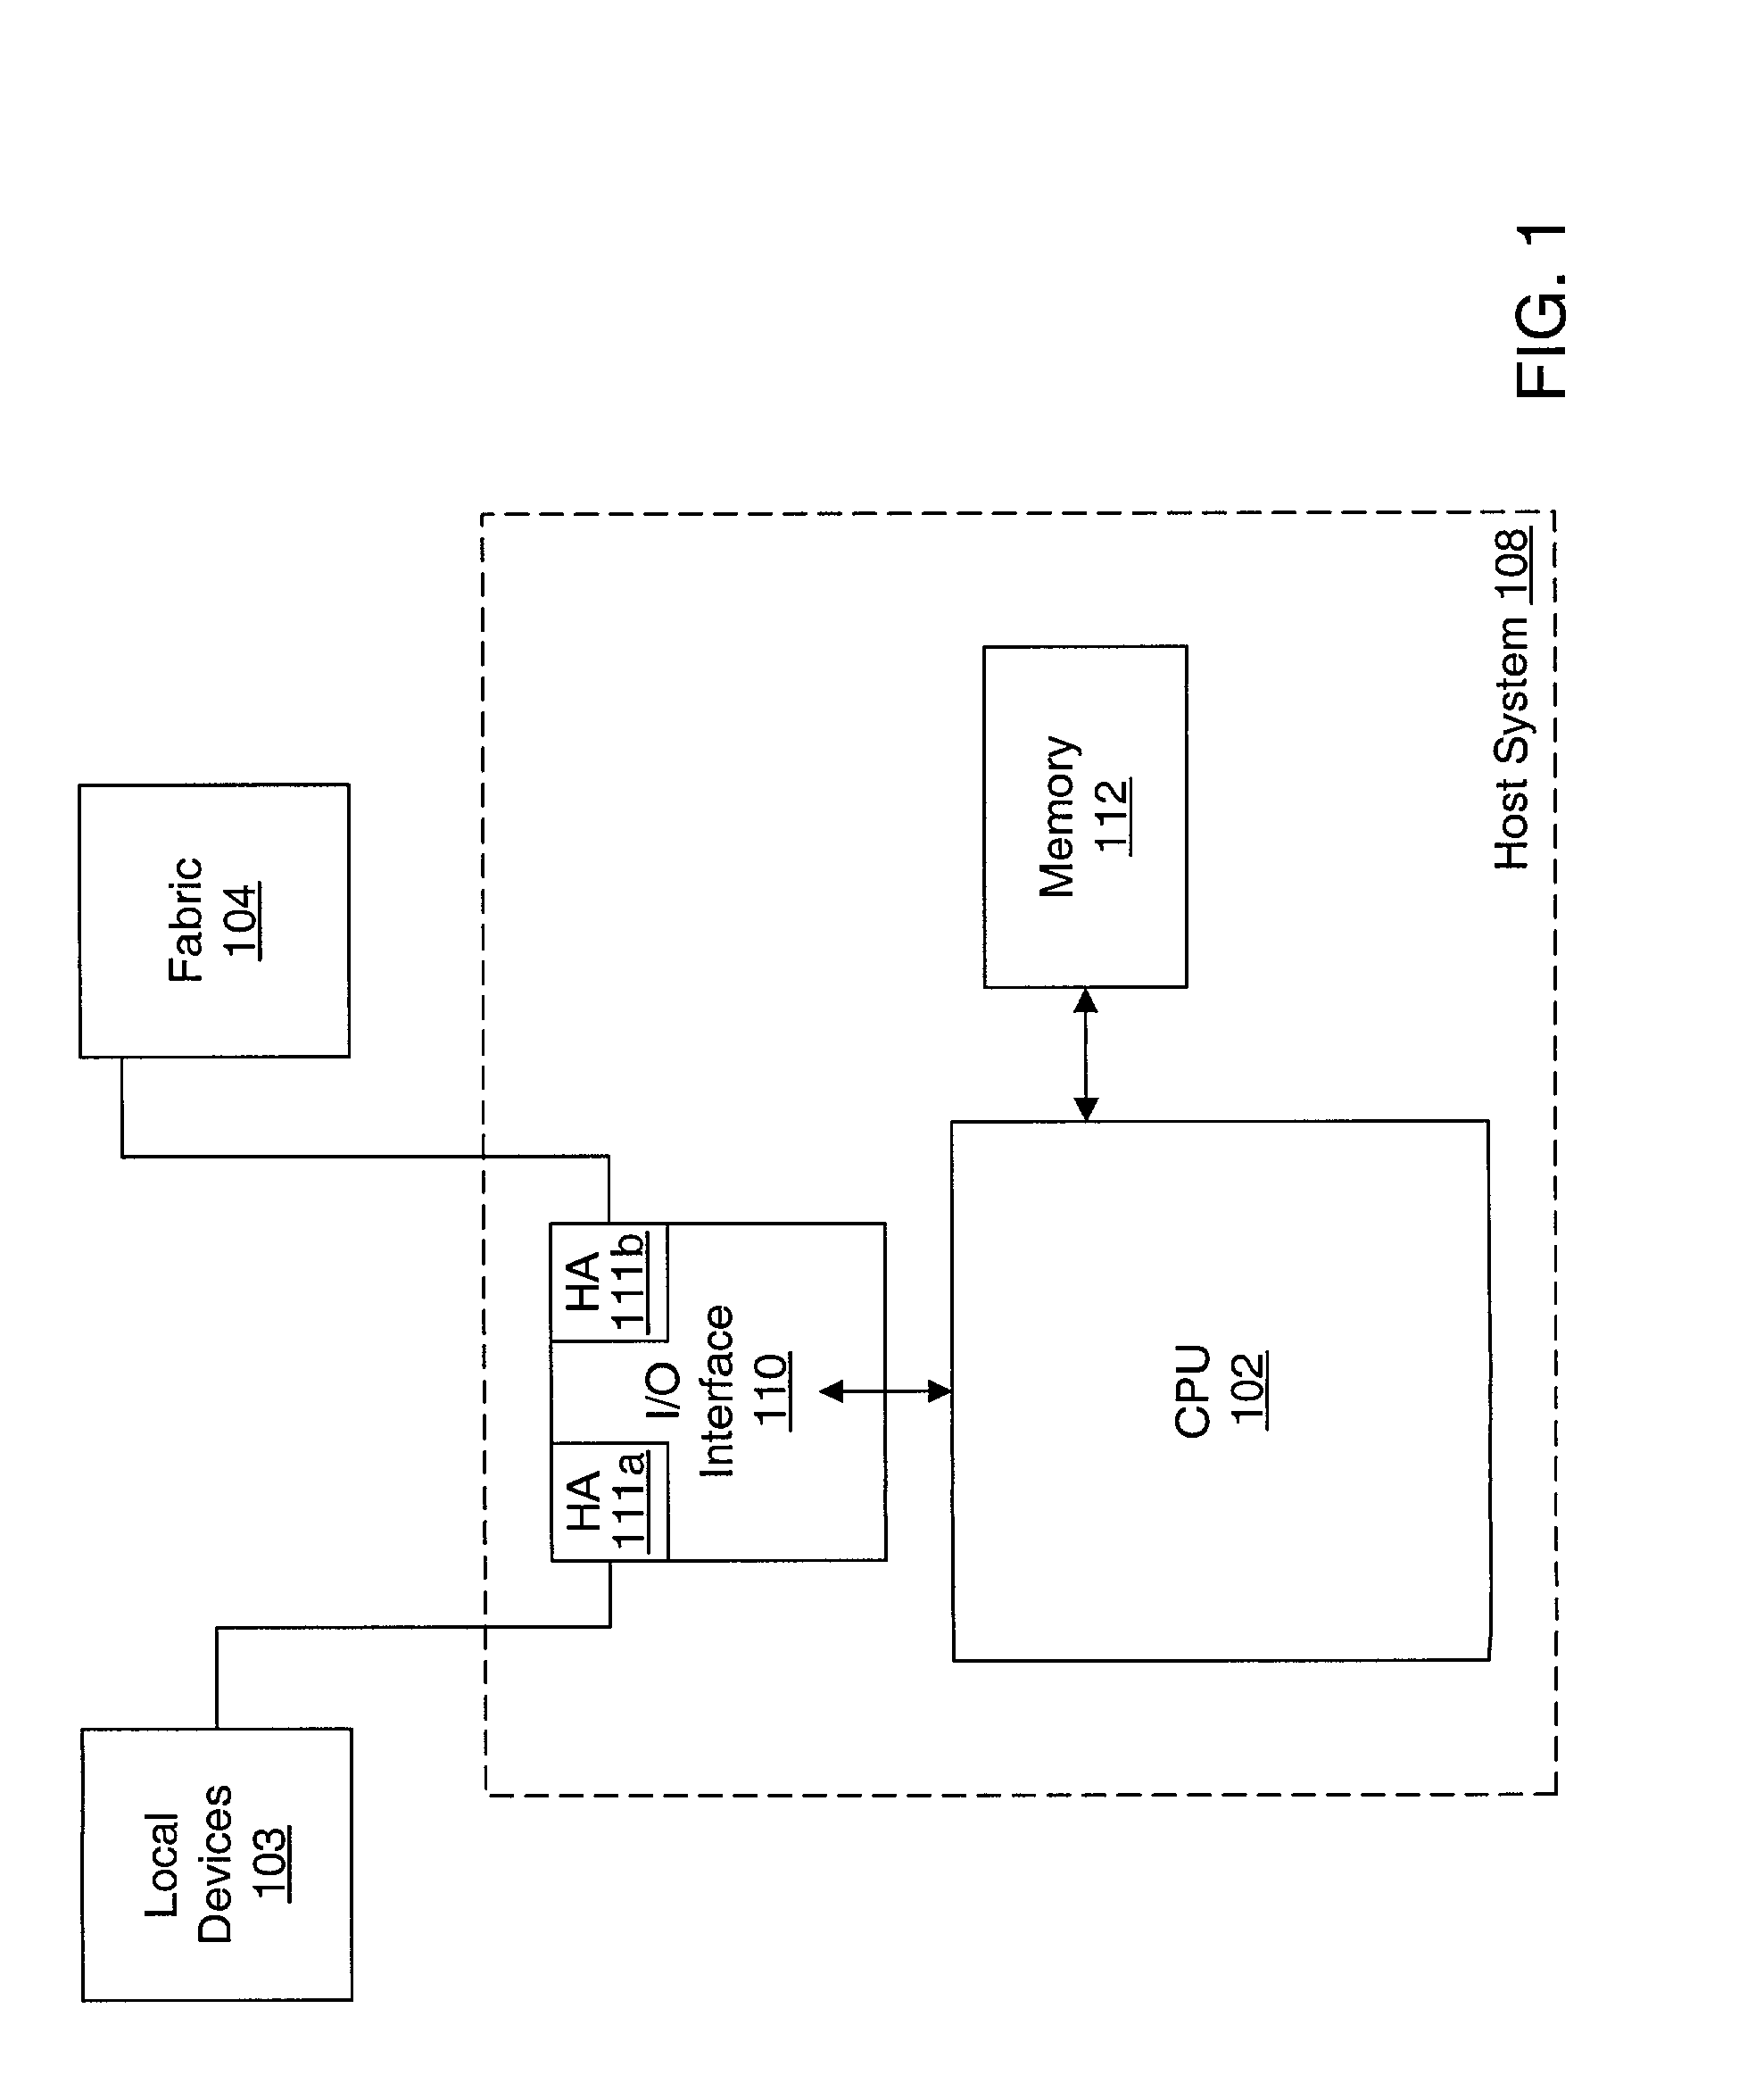 Maintaining fabric device configuration through dynamic reconfiguration